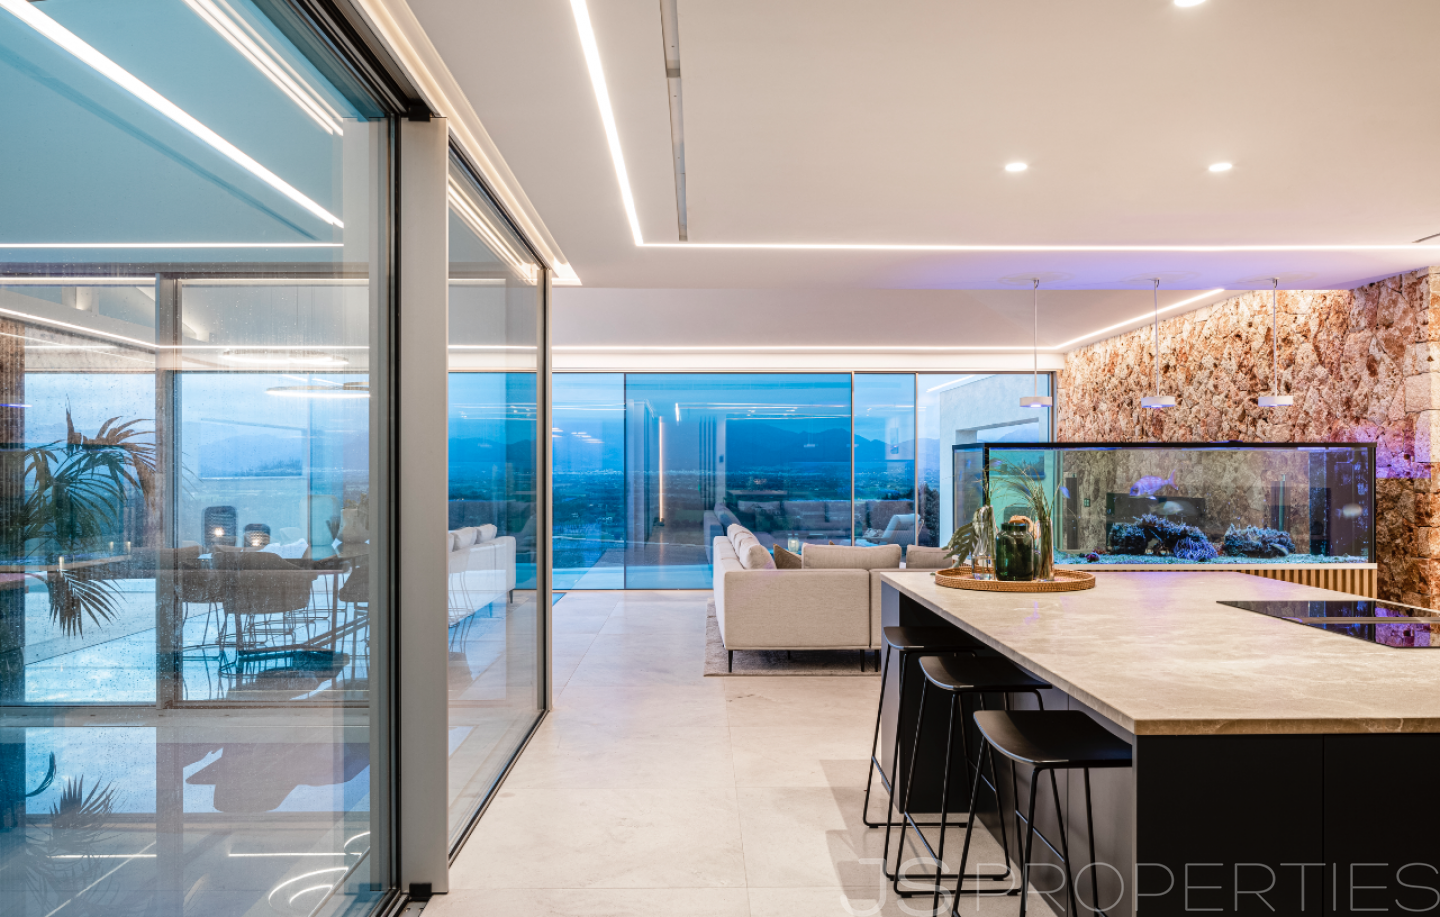 SPECTACULAR HIGH TECH MODERN VILLA WITH INCREDIBLE VIEWS FOR SALE IN COSTITX